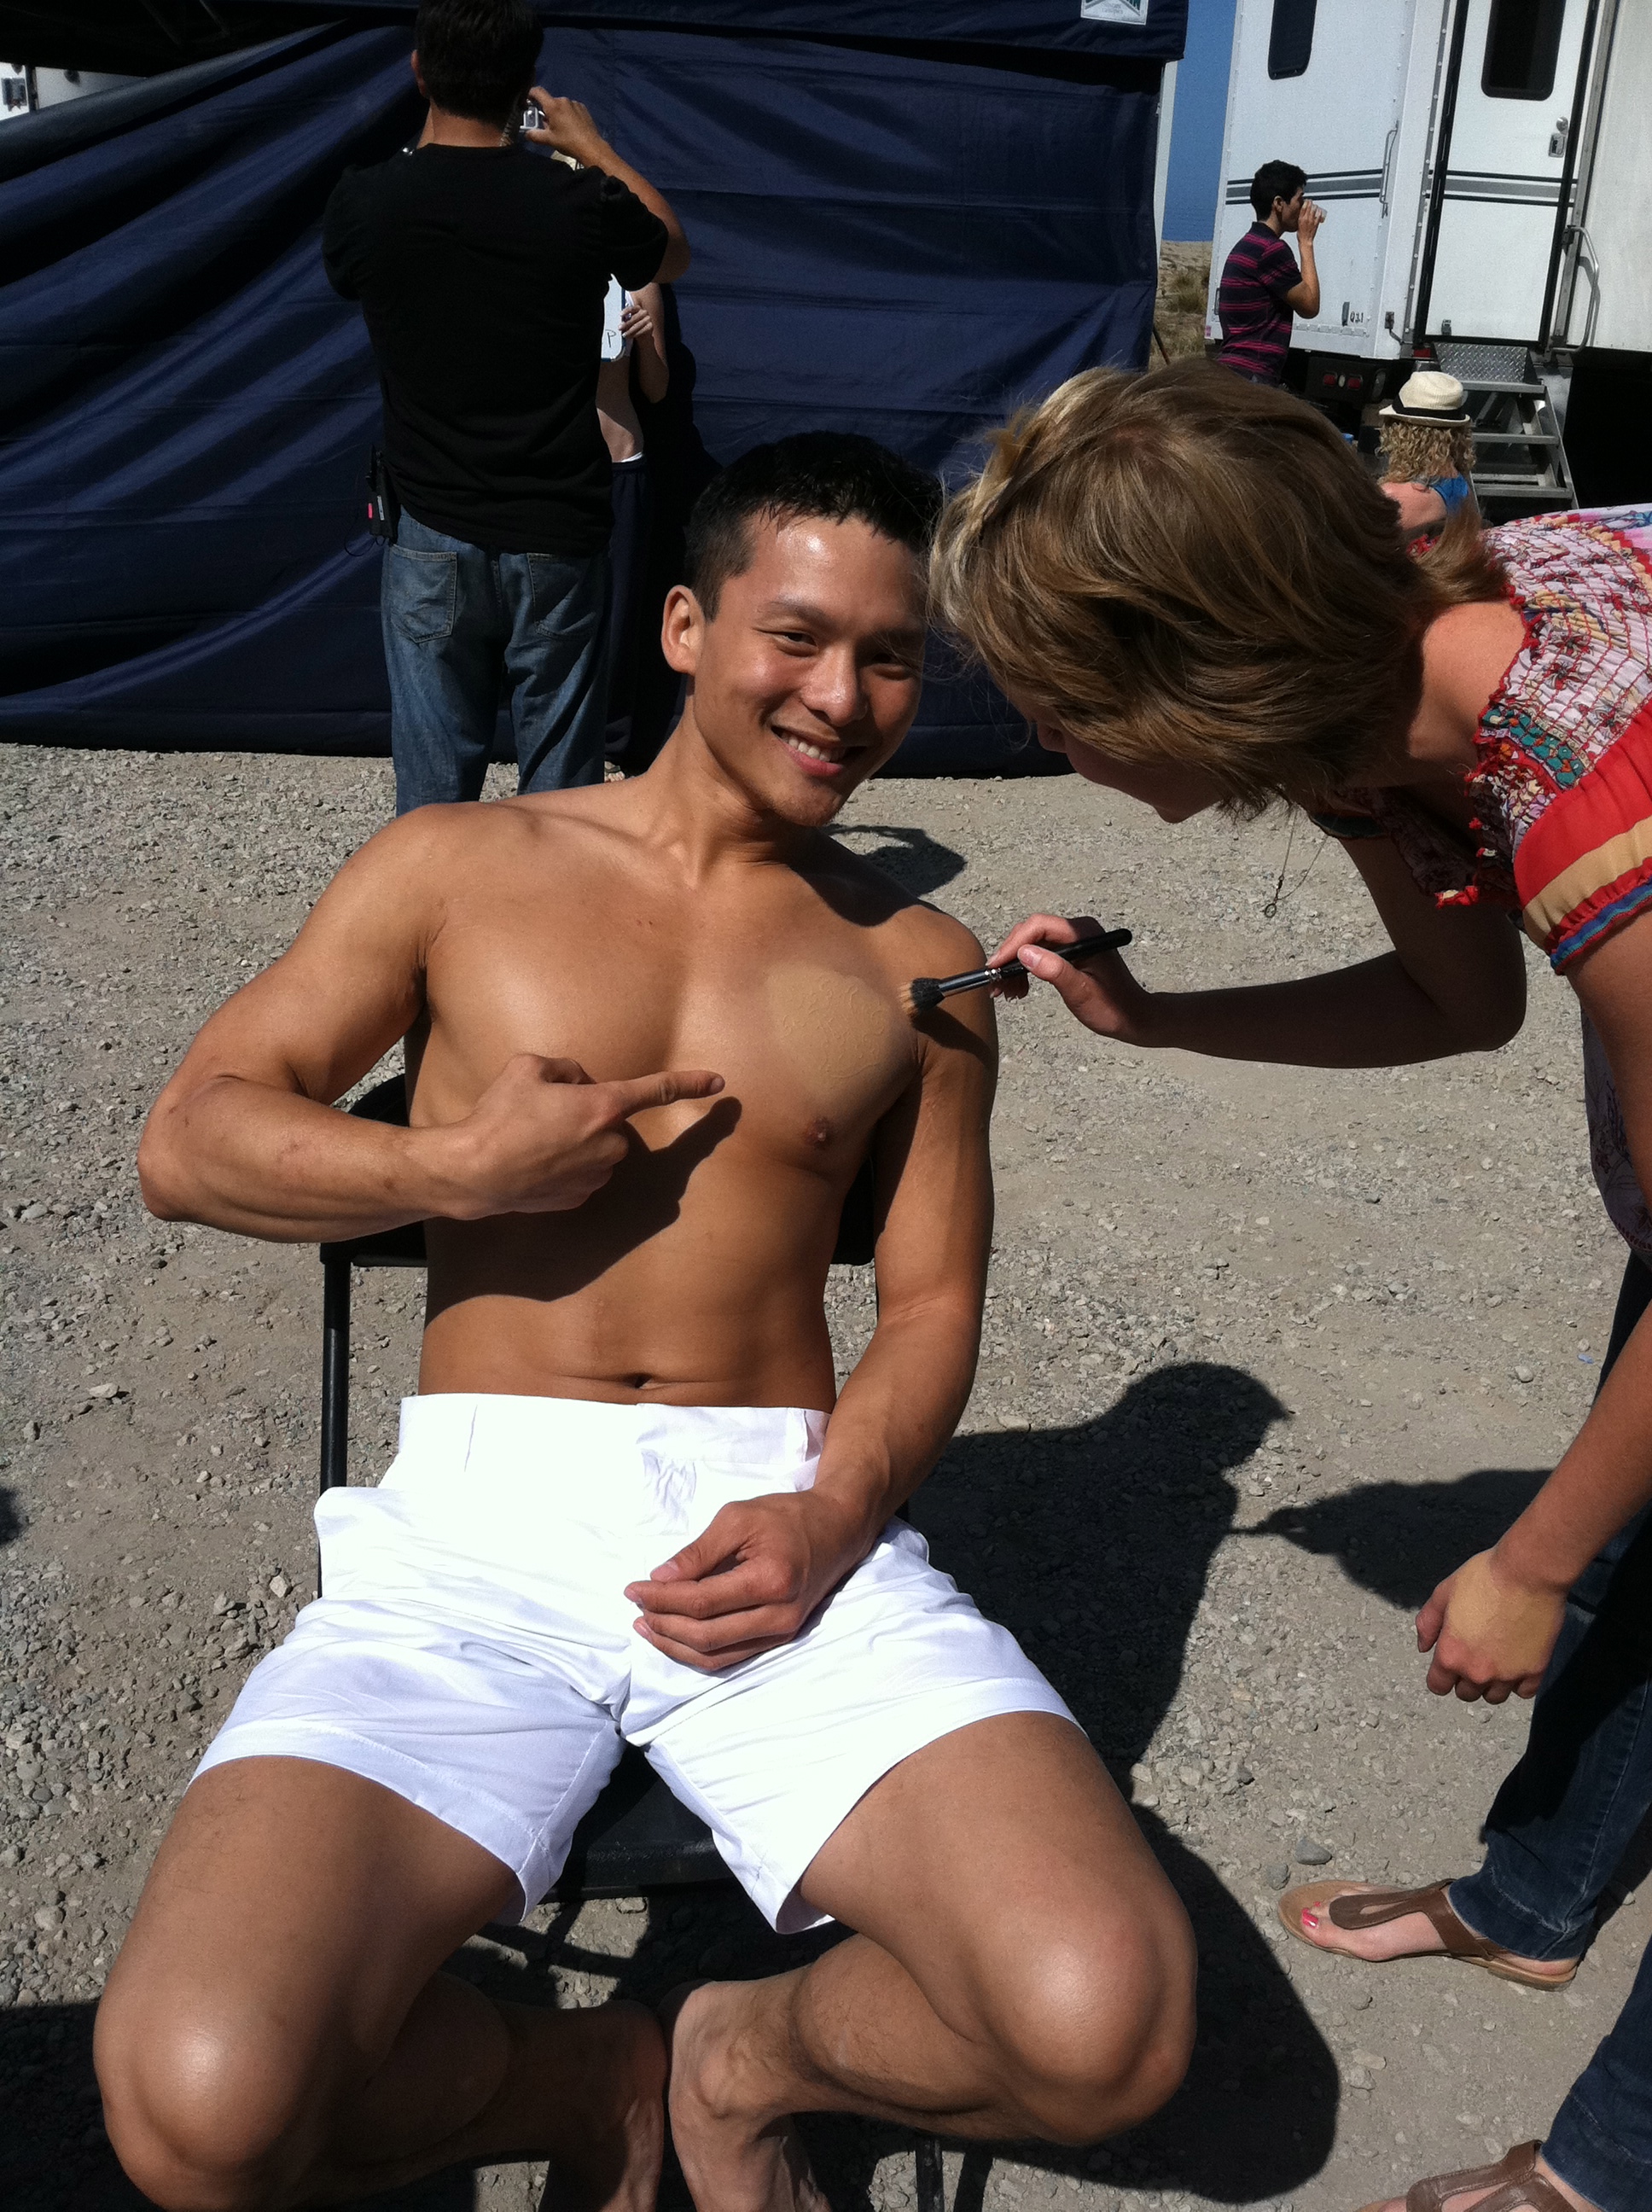 On set getting tattoo covered up... Was an amazing day of shooting at the beach.